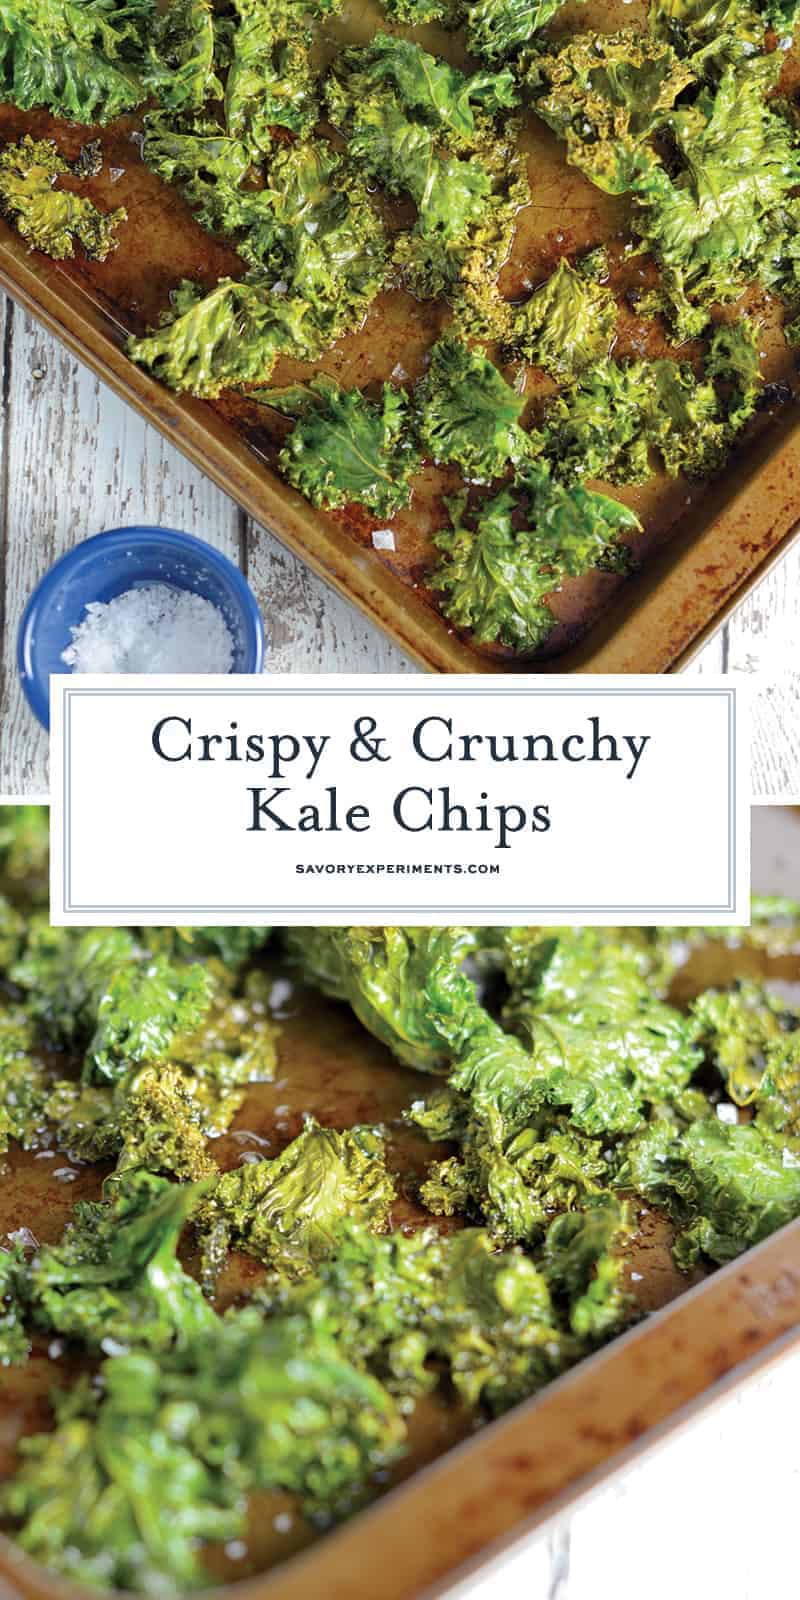 All you need for this Kale Chips recipe is kale leaves, olive oil, and sea salt! A tasty, easy, and healthy alternative to potato chips! #kalechipsrecipe #bakedkalechips www.savoryexperiments.com 